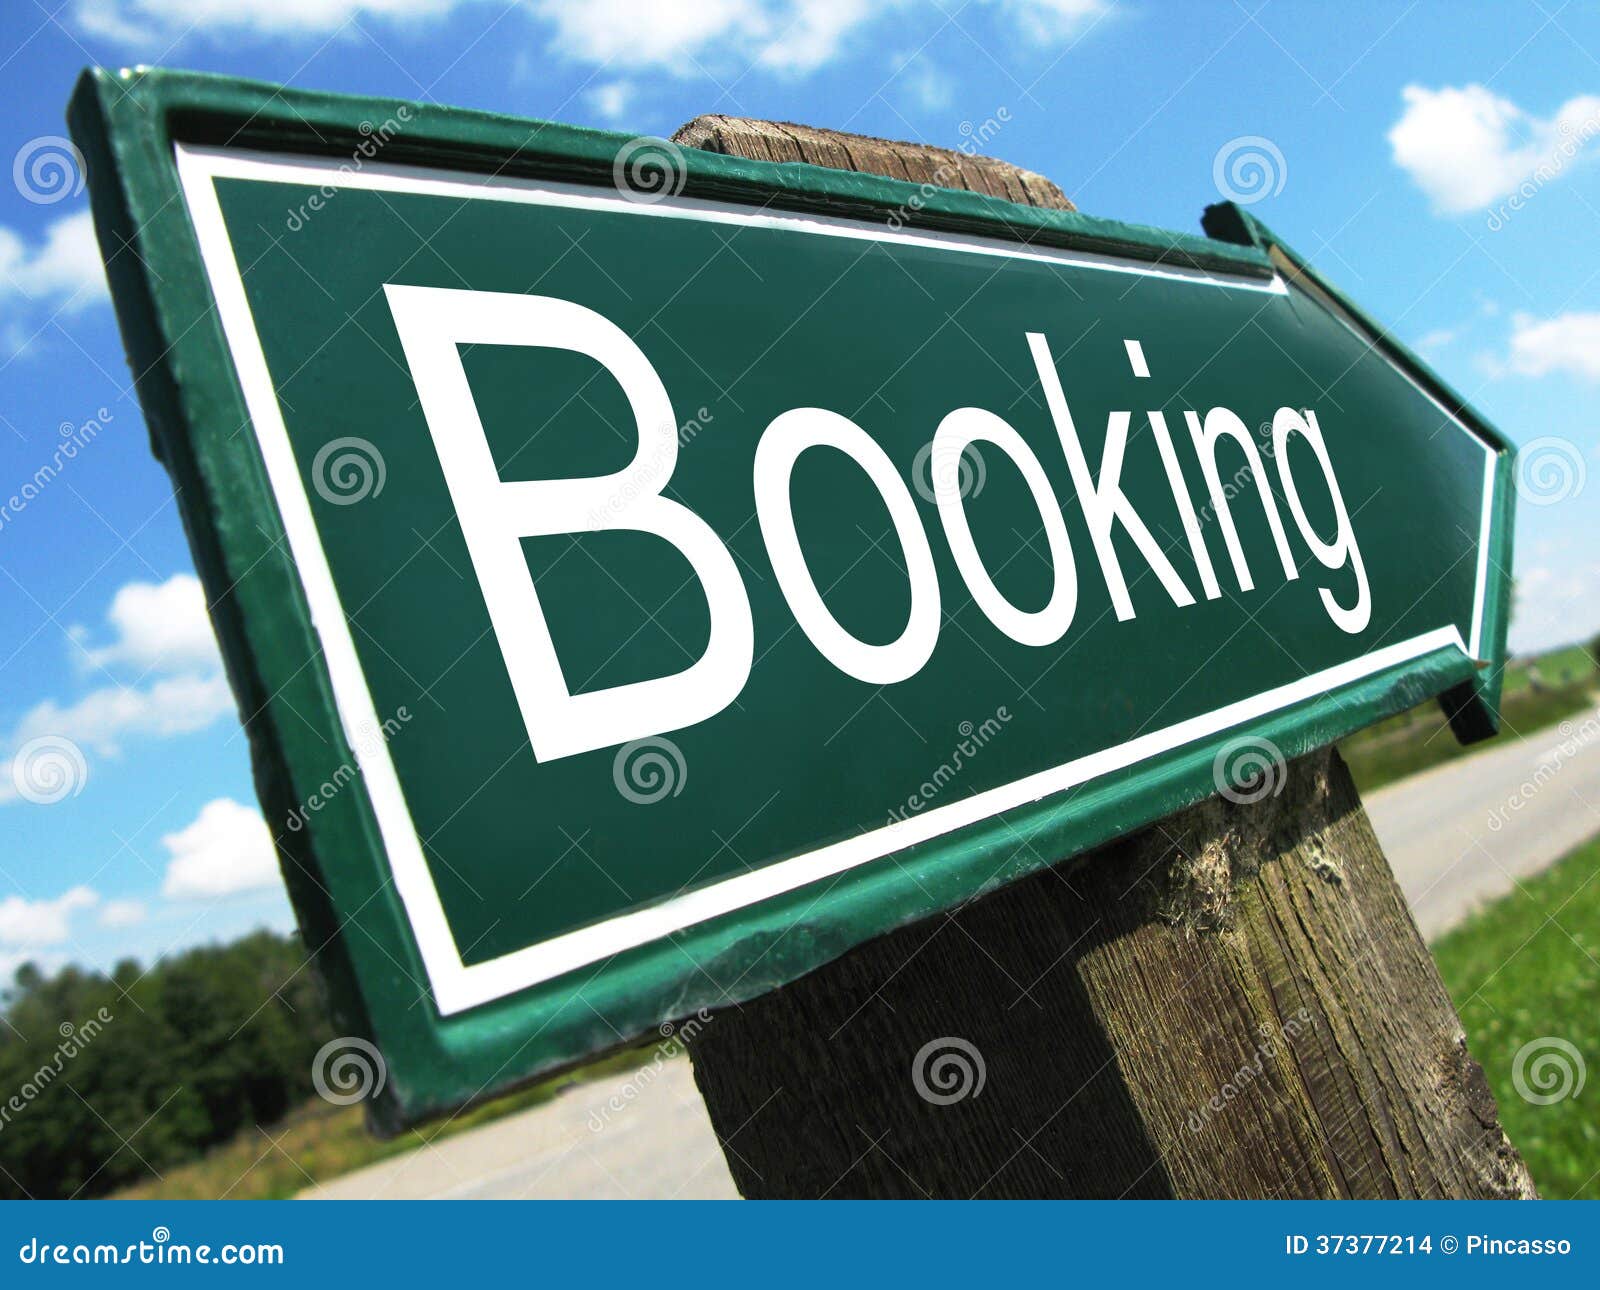 Booking road sign stock photo. Image of pointer, arrow